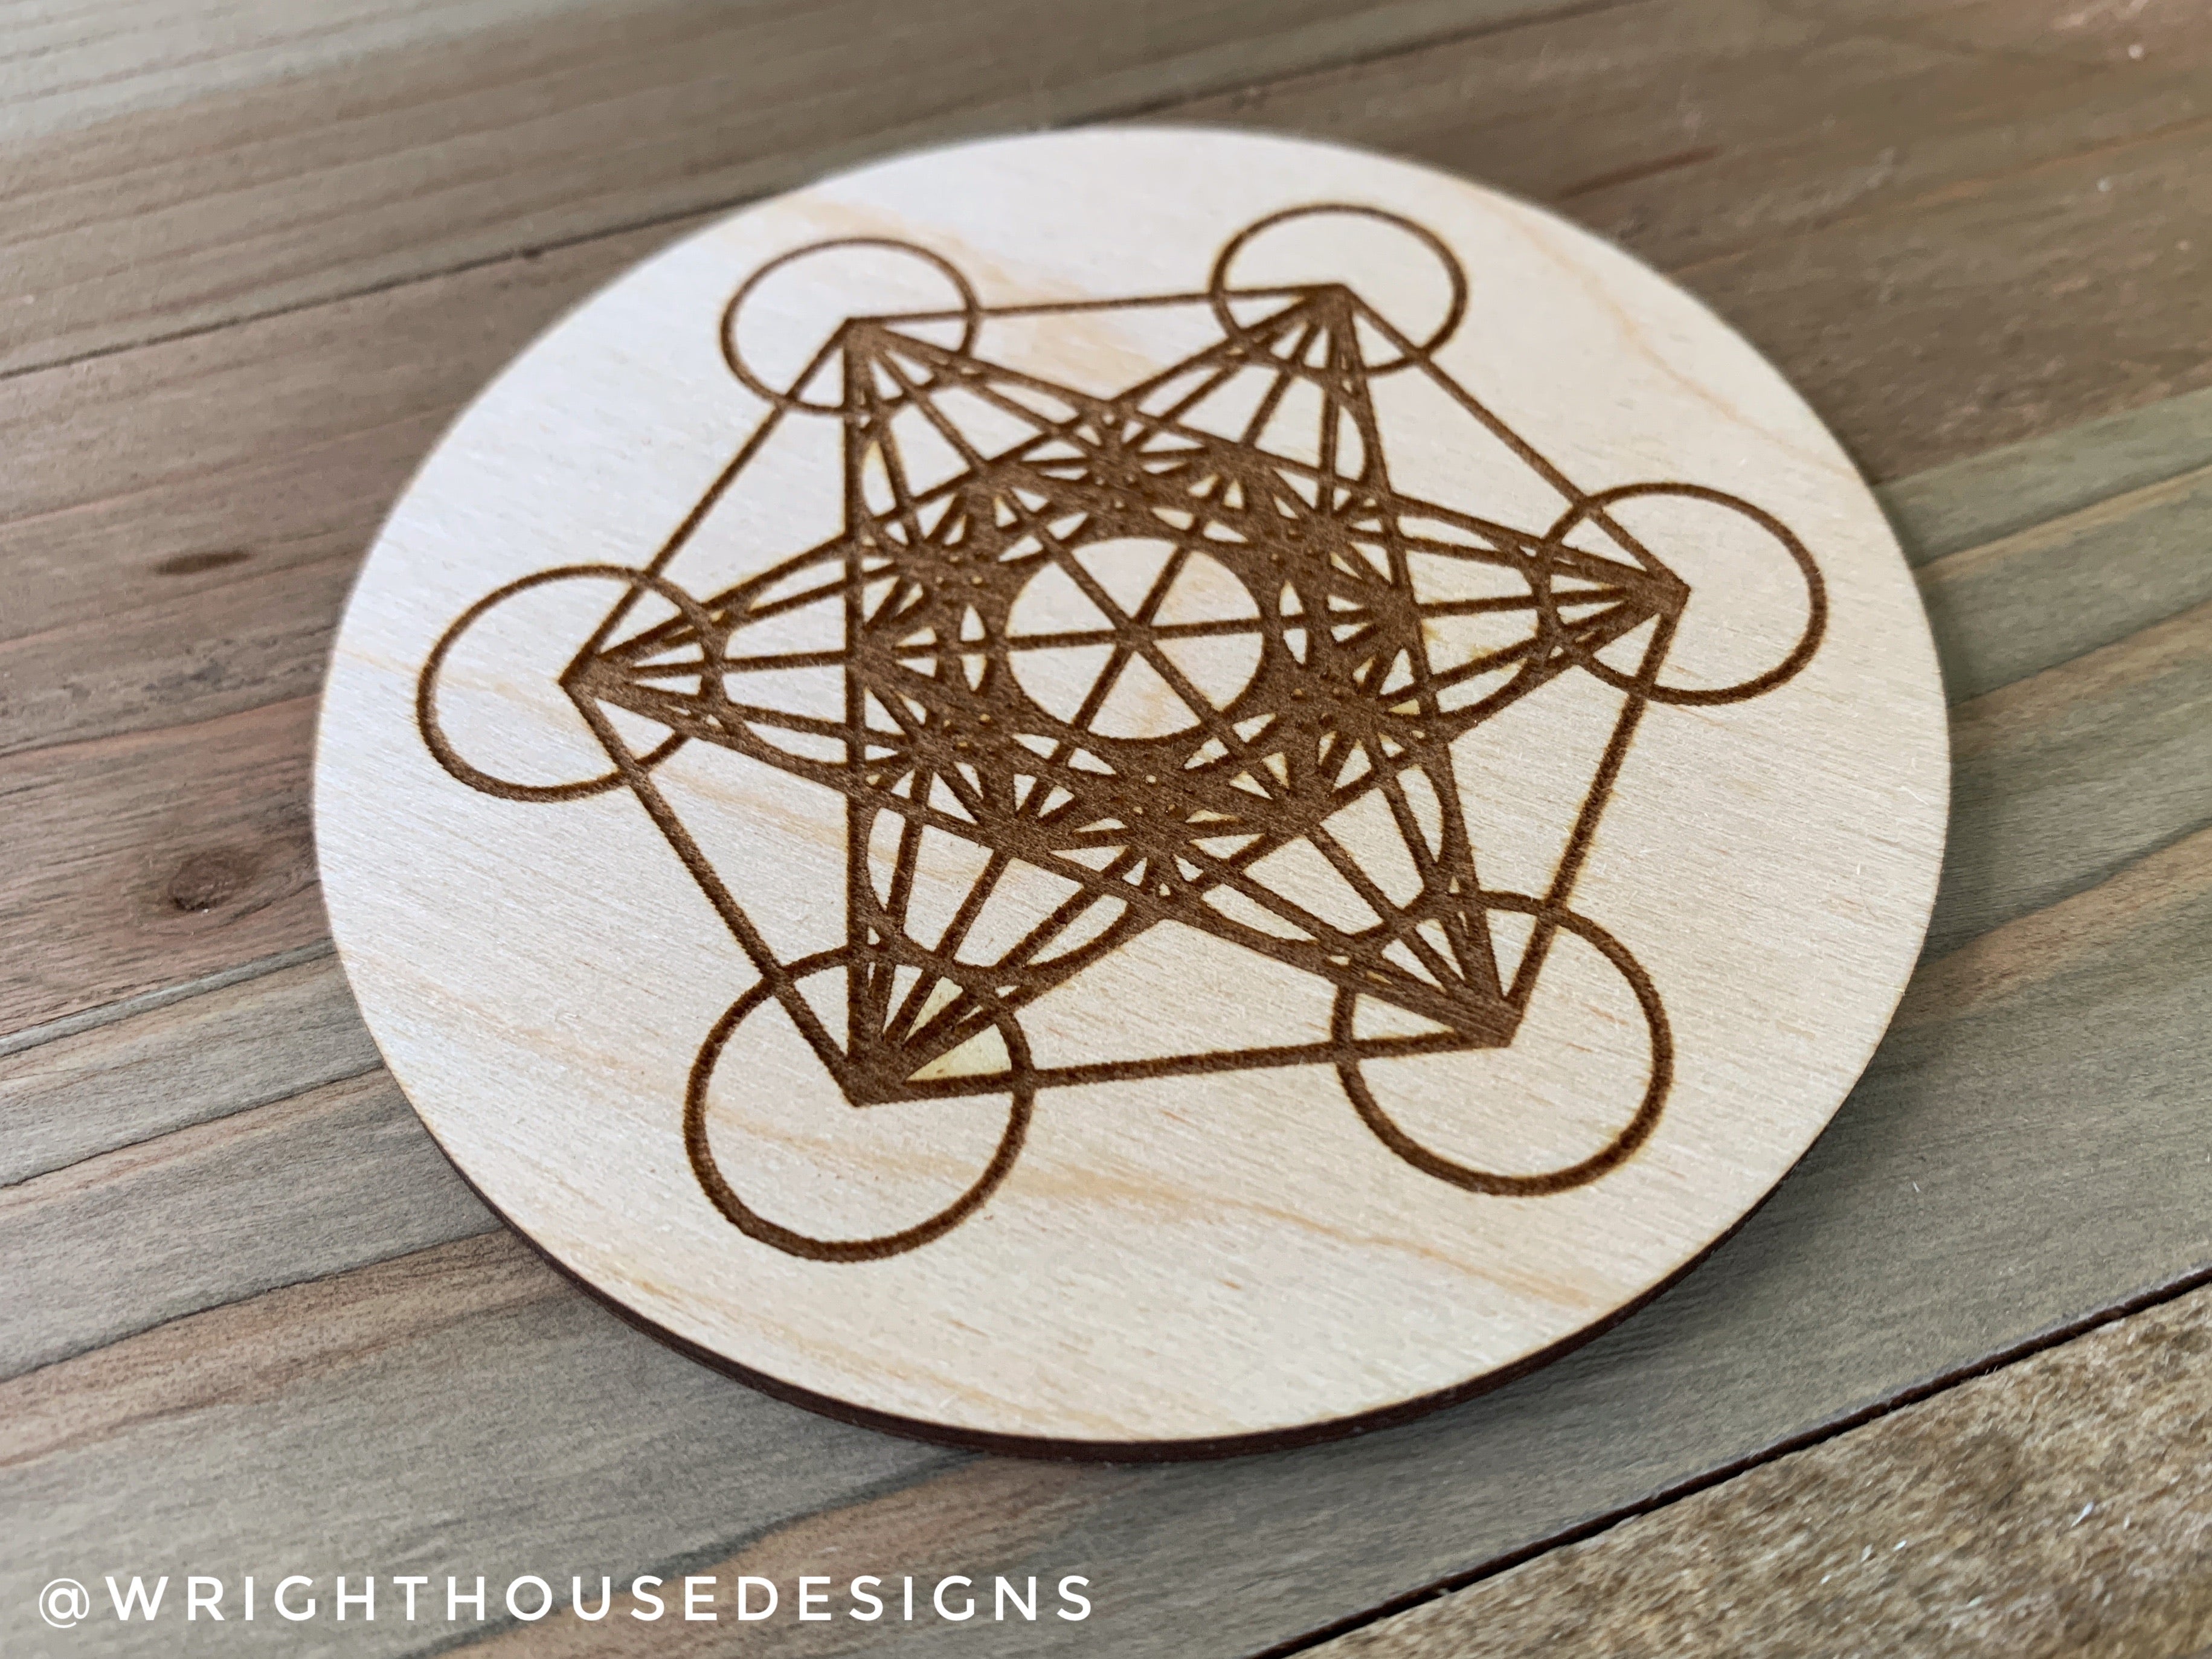 Metatron Cube - Wooden Coasters and Grids